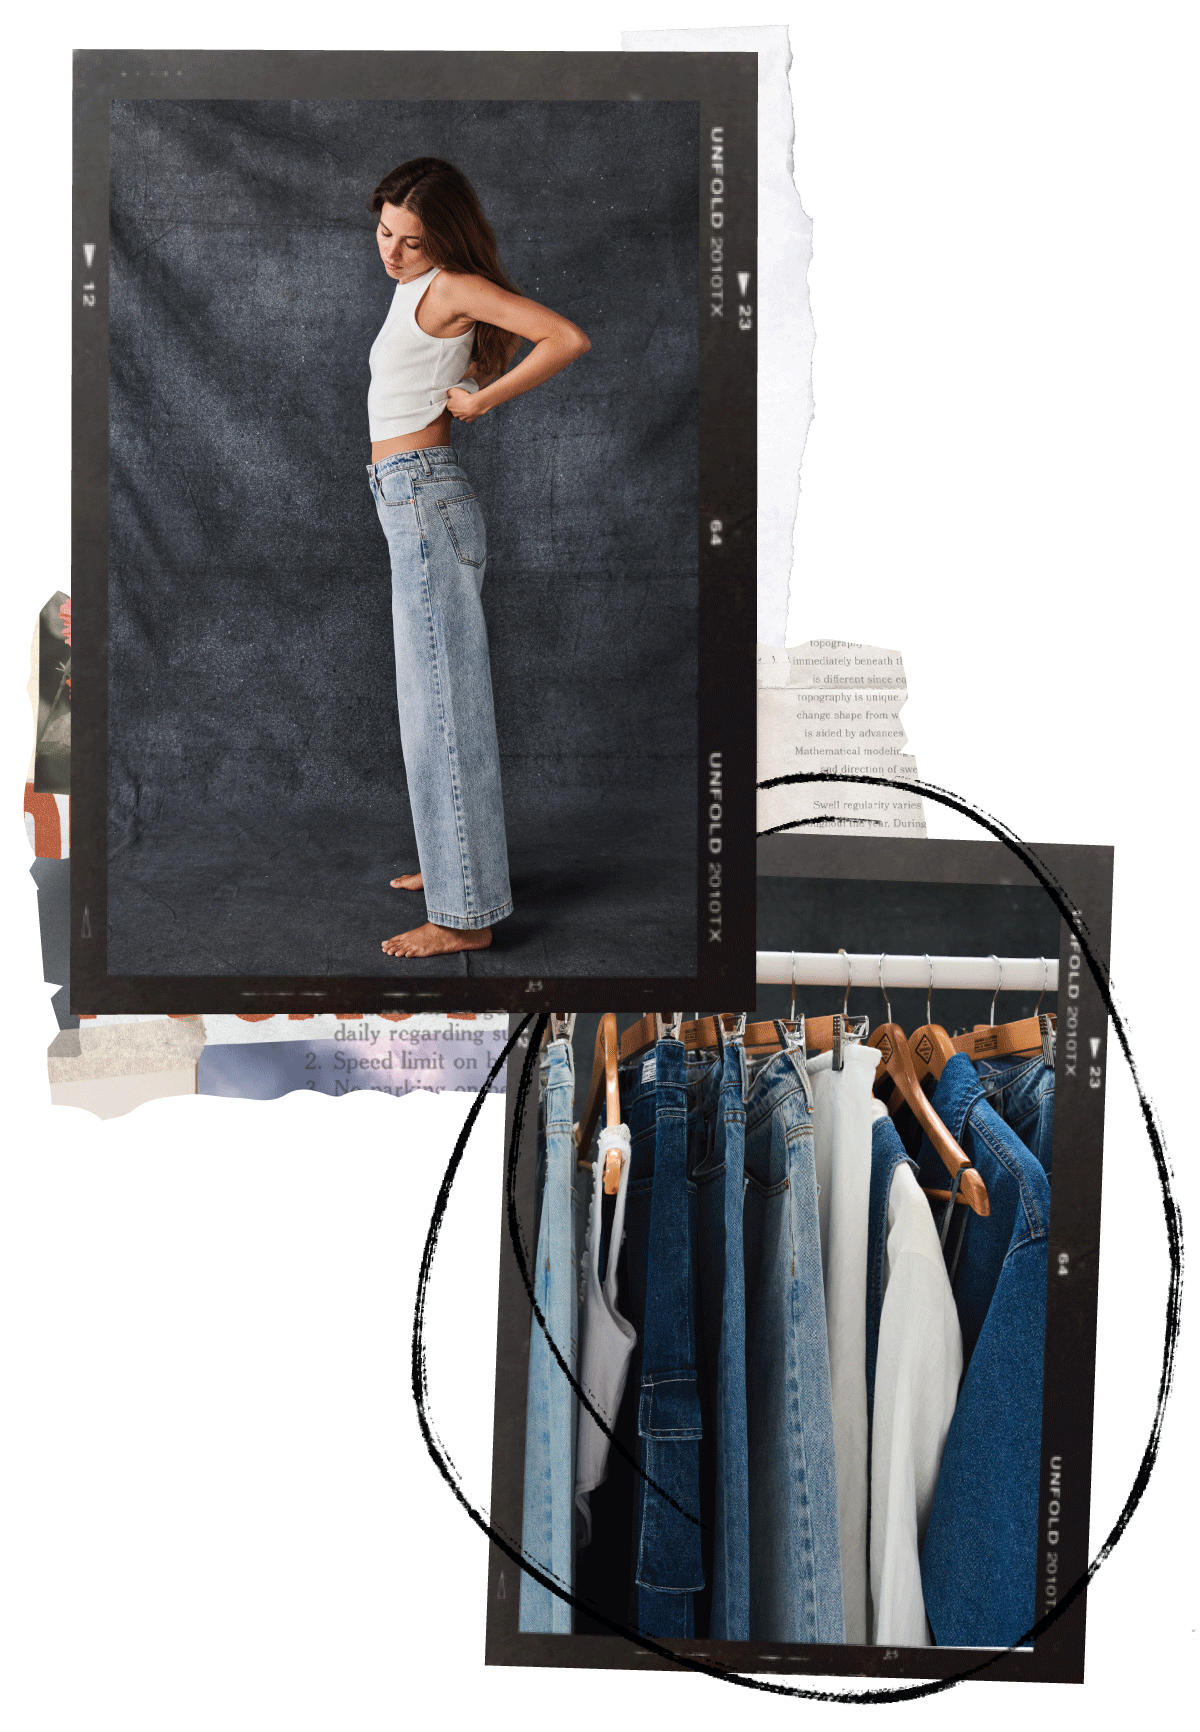 Collage layout. Top left image sits in a film frame of model wearing white tank and light denim jeans, image GIFs of model wearing the same thing in different poses. Bottom right image is an image of a rack with denim clothes on it. 